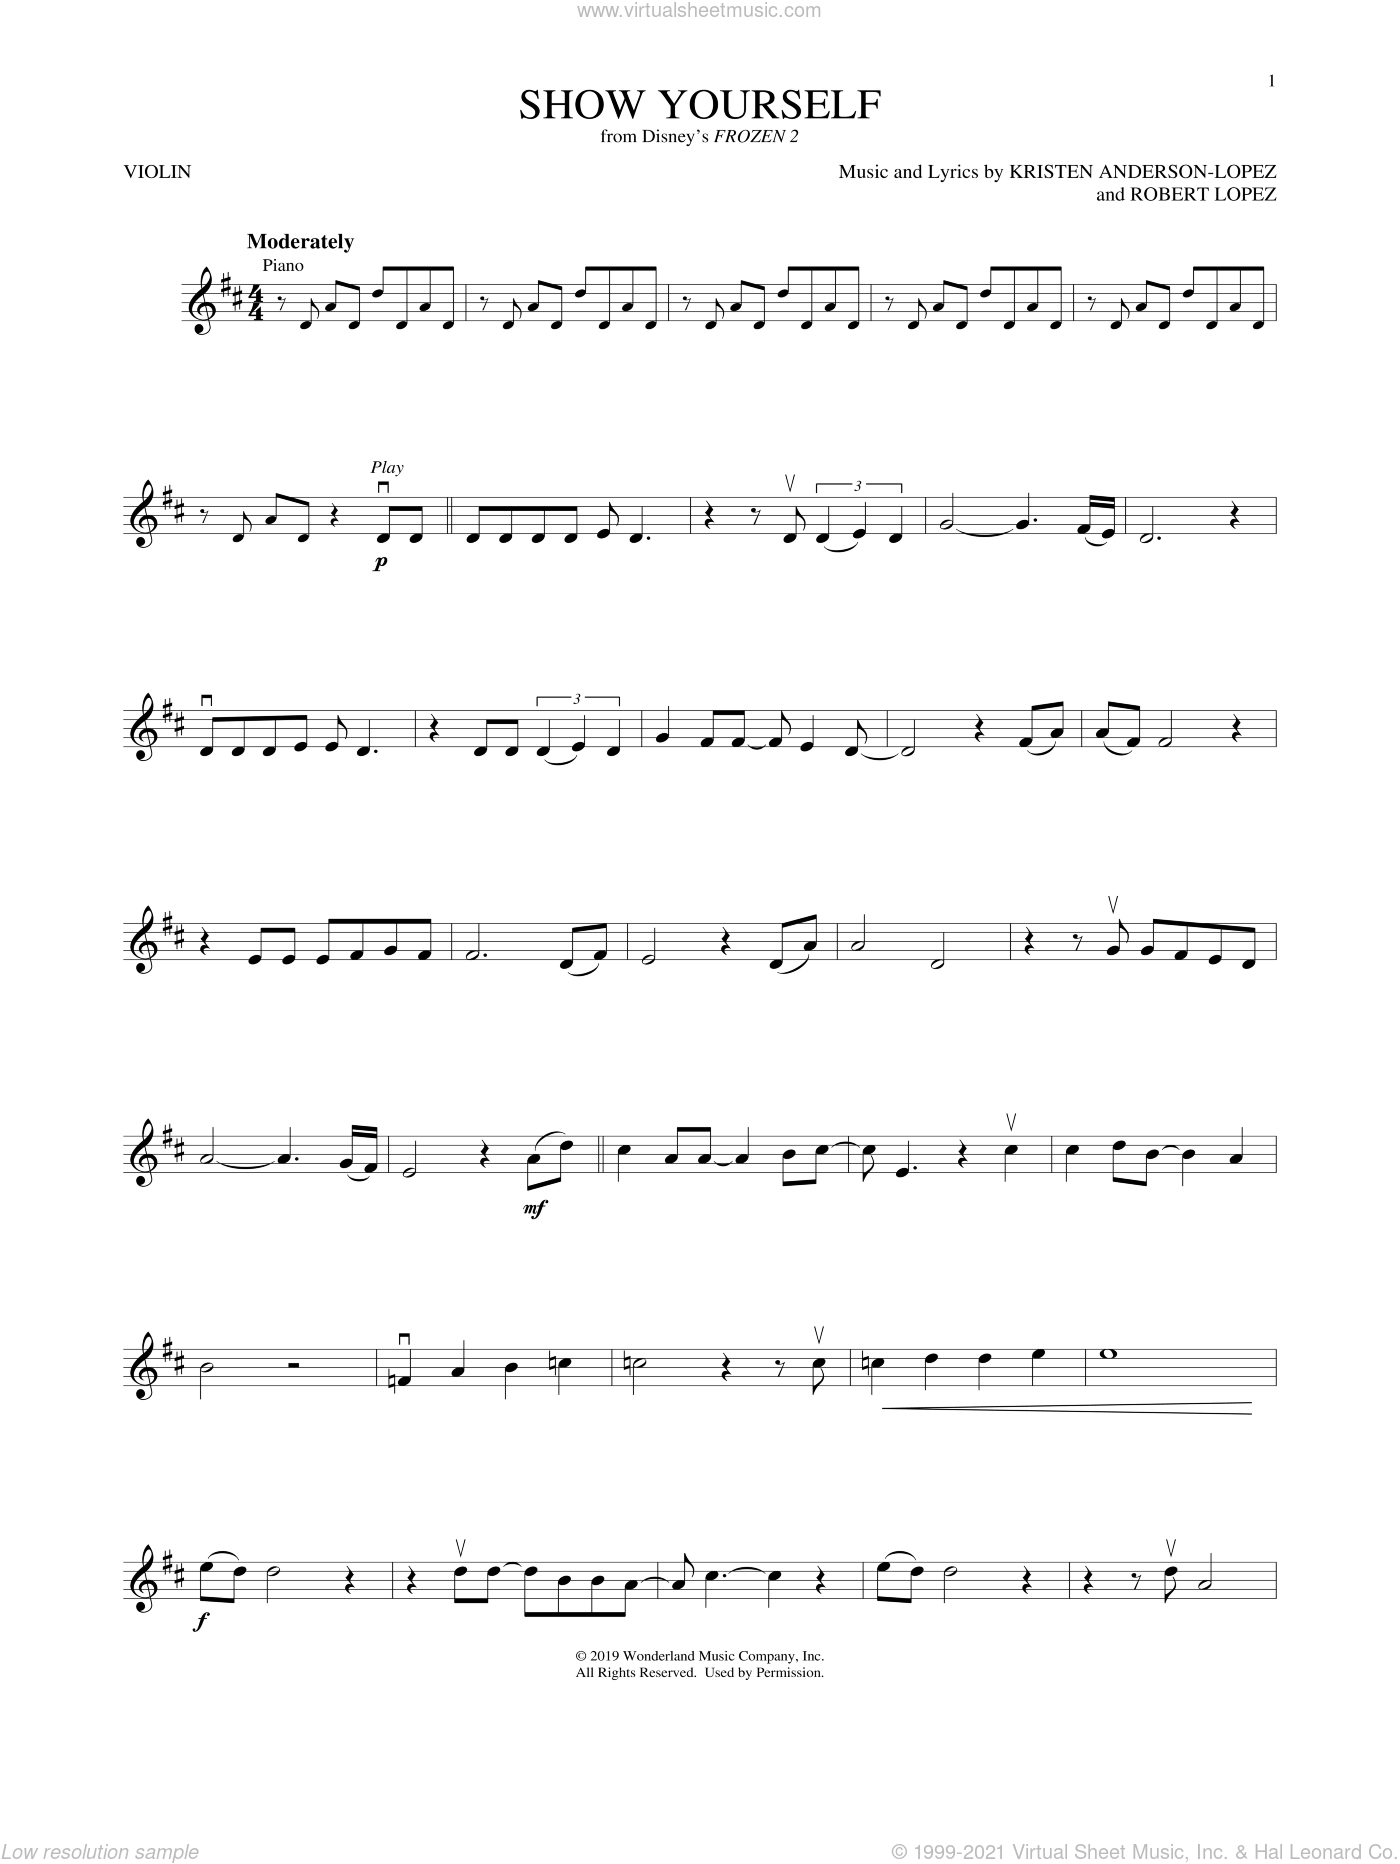 Wood - Show Yourself (from Disney's Frozen 2) sheet music for violin solo